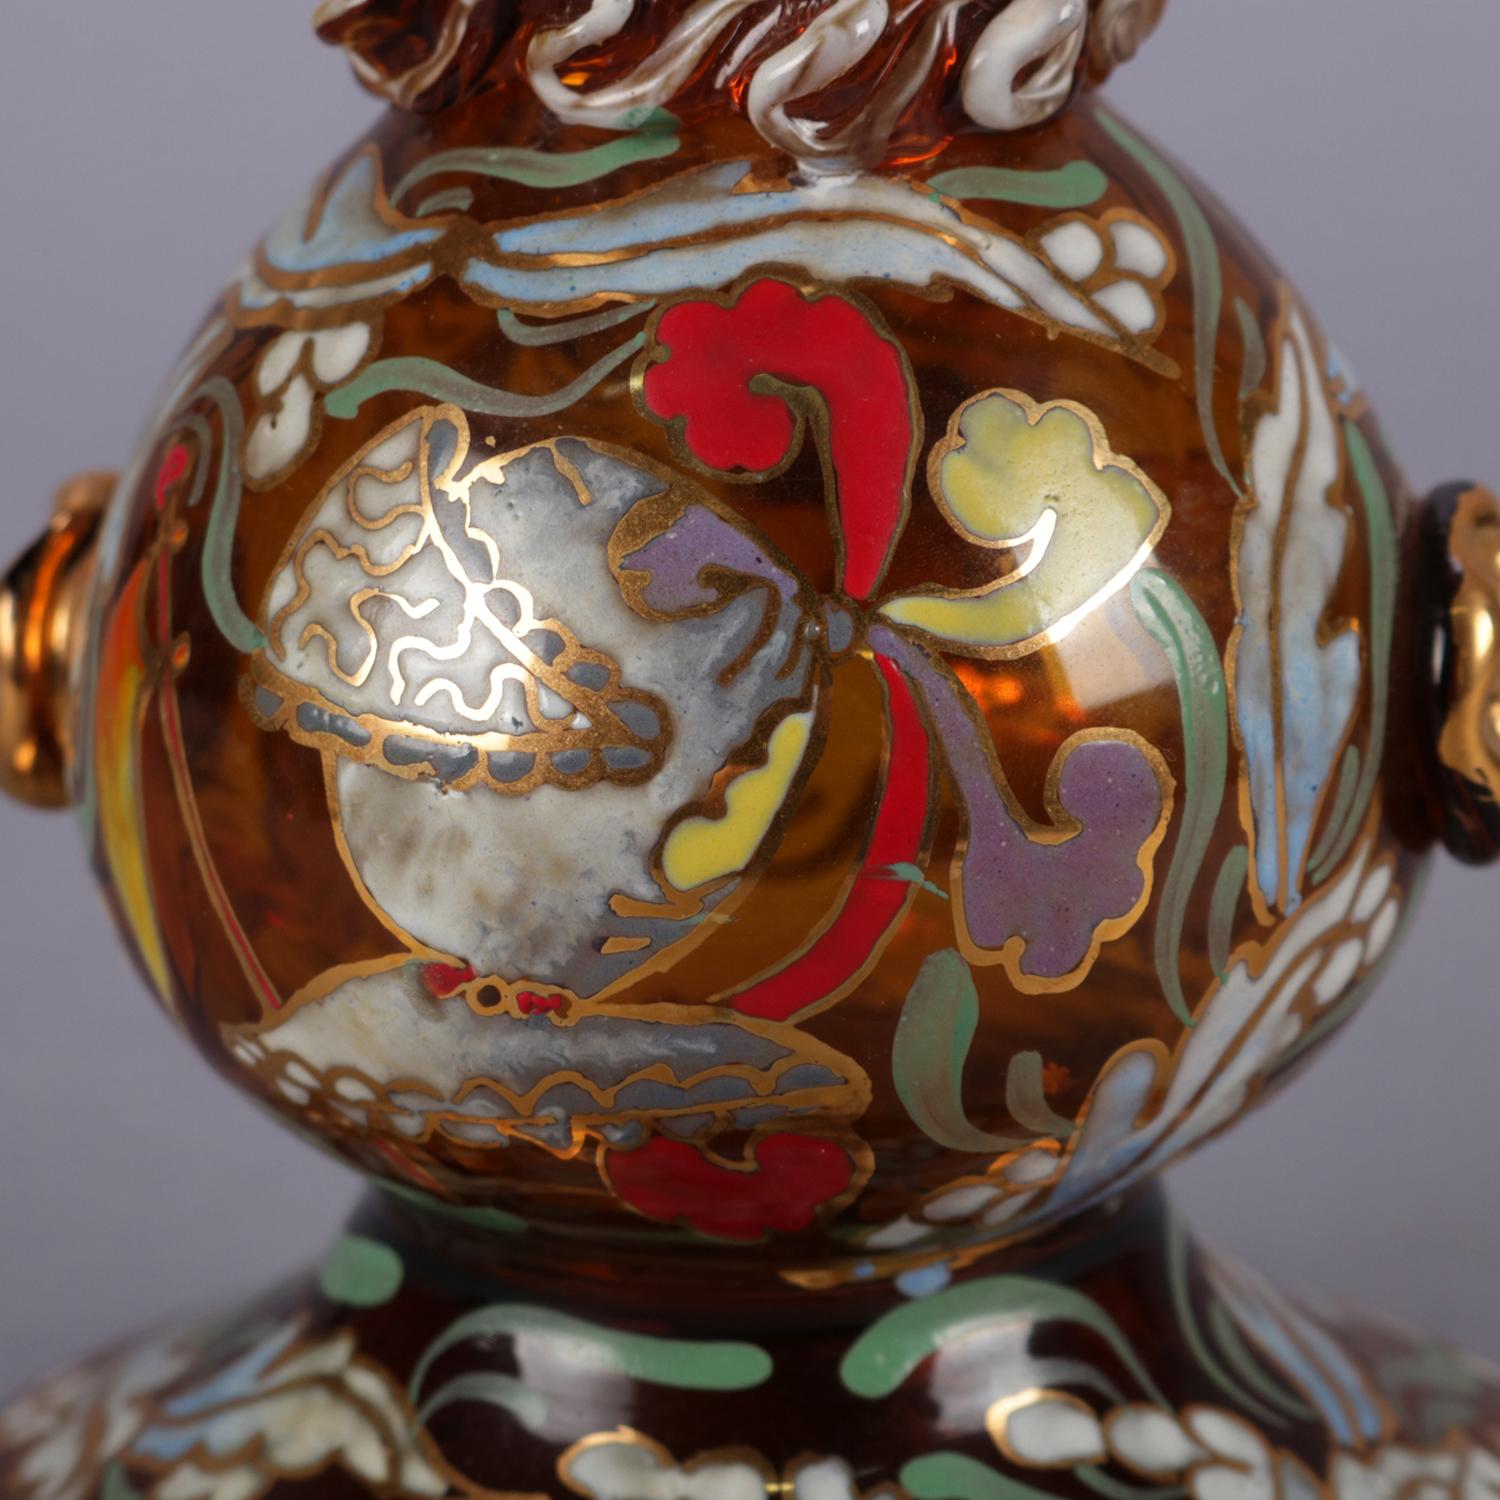 Antique Bohemian Moser School blown amber glass ewer features gourd form and Persian styling having hand painted gilt and polychrome decoration, stopper with figural swan finial and cork, circa 1890.

Measures: 16